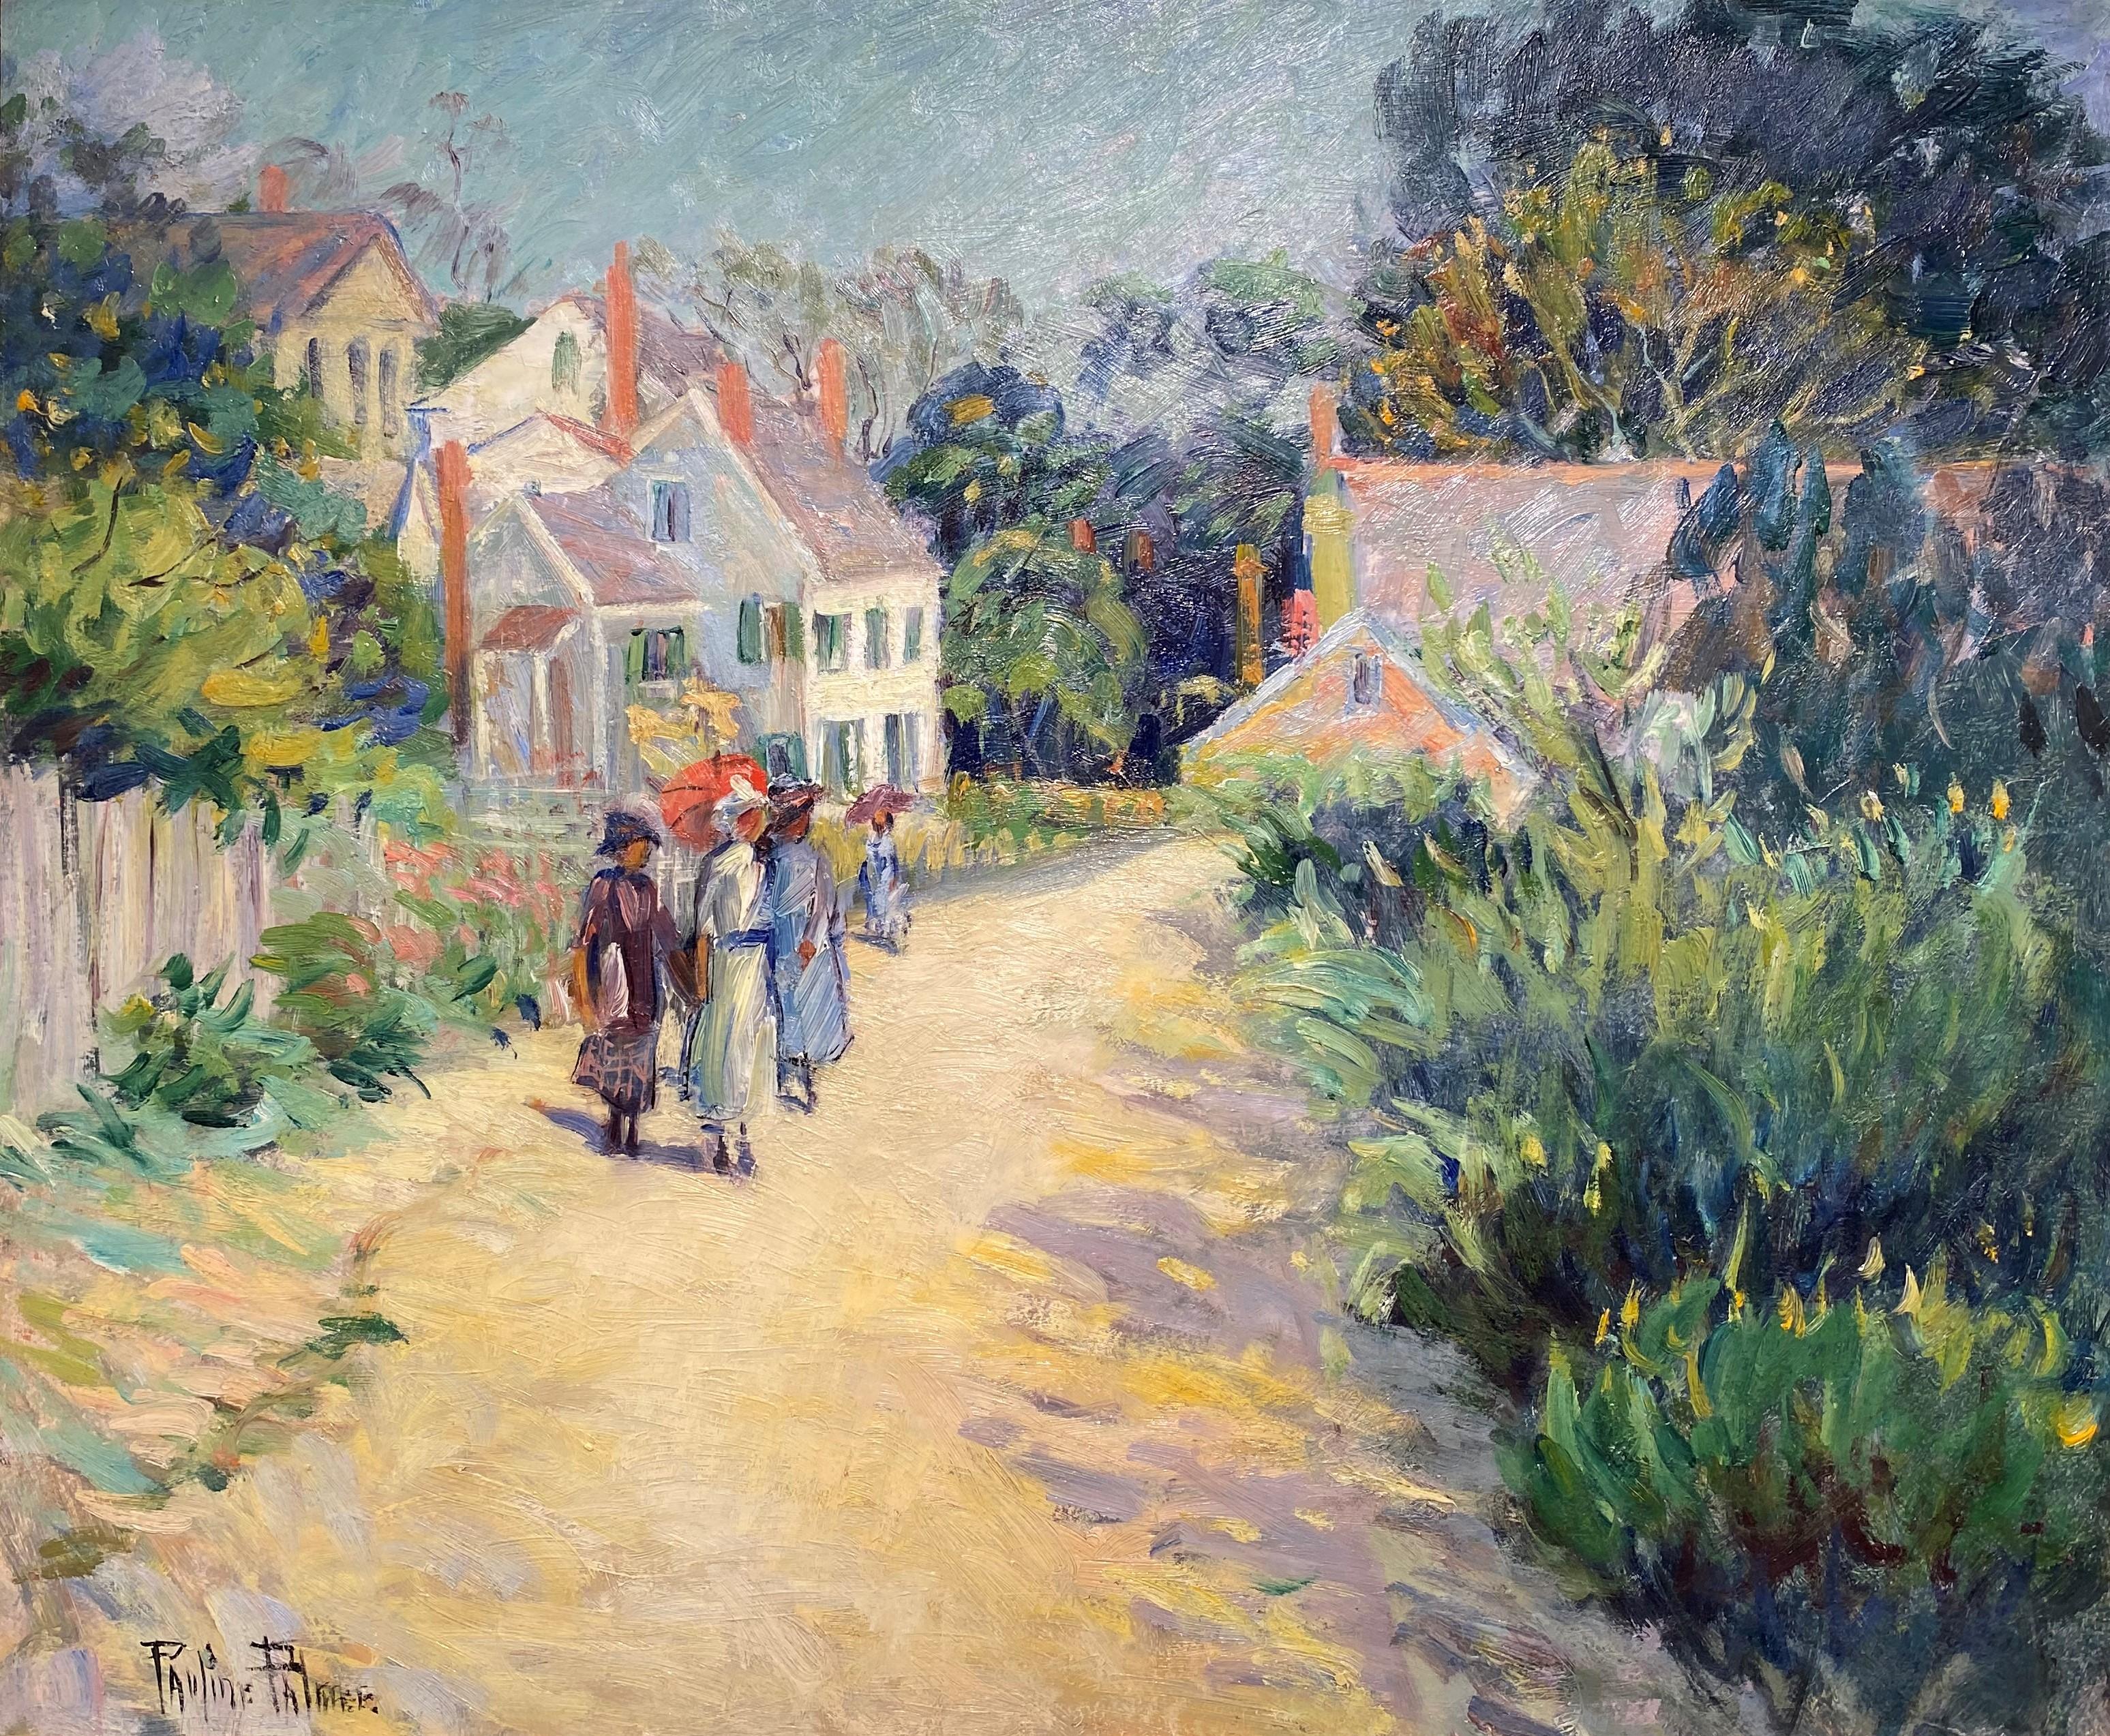 Ladies Sketch Club, Possibly Provincetown Massachusetts - Painting by Pauline Palmer